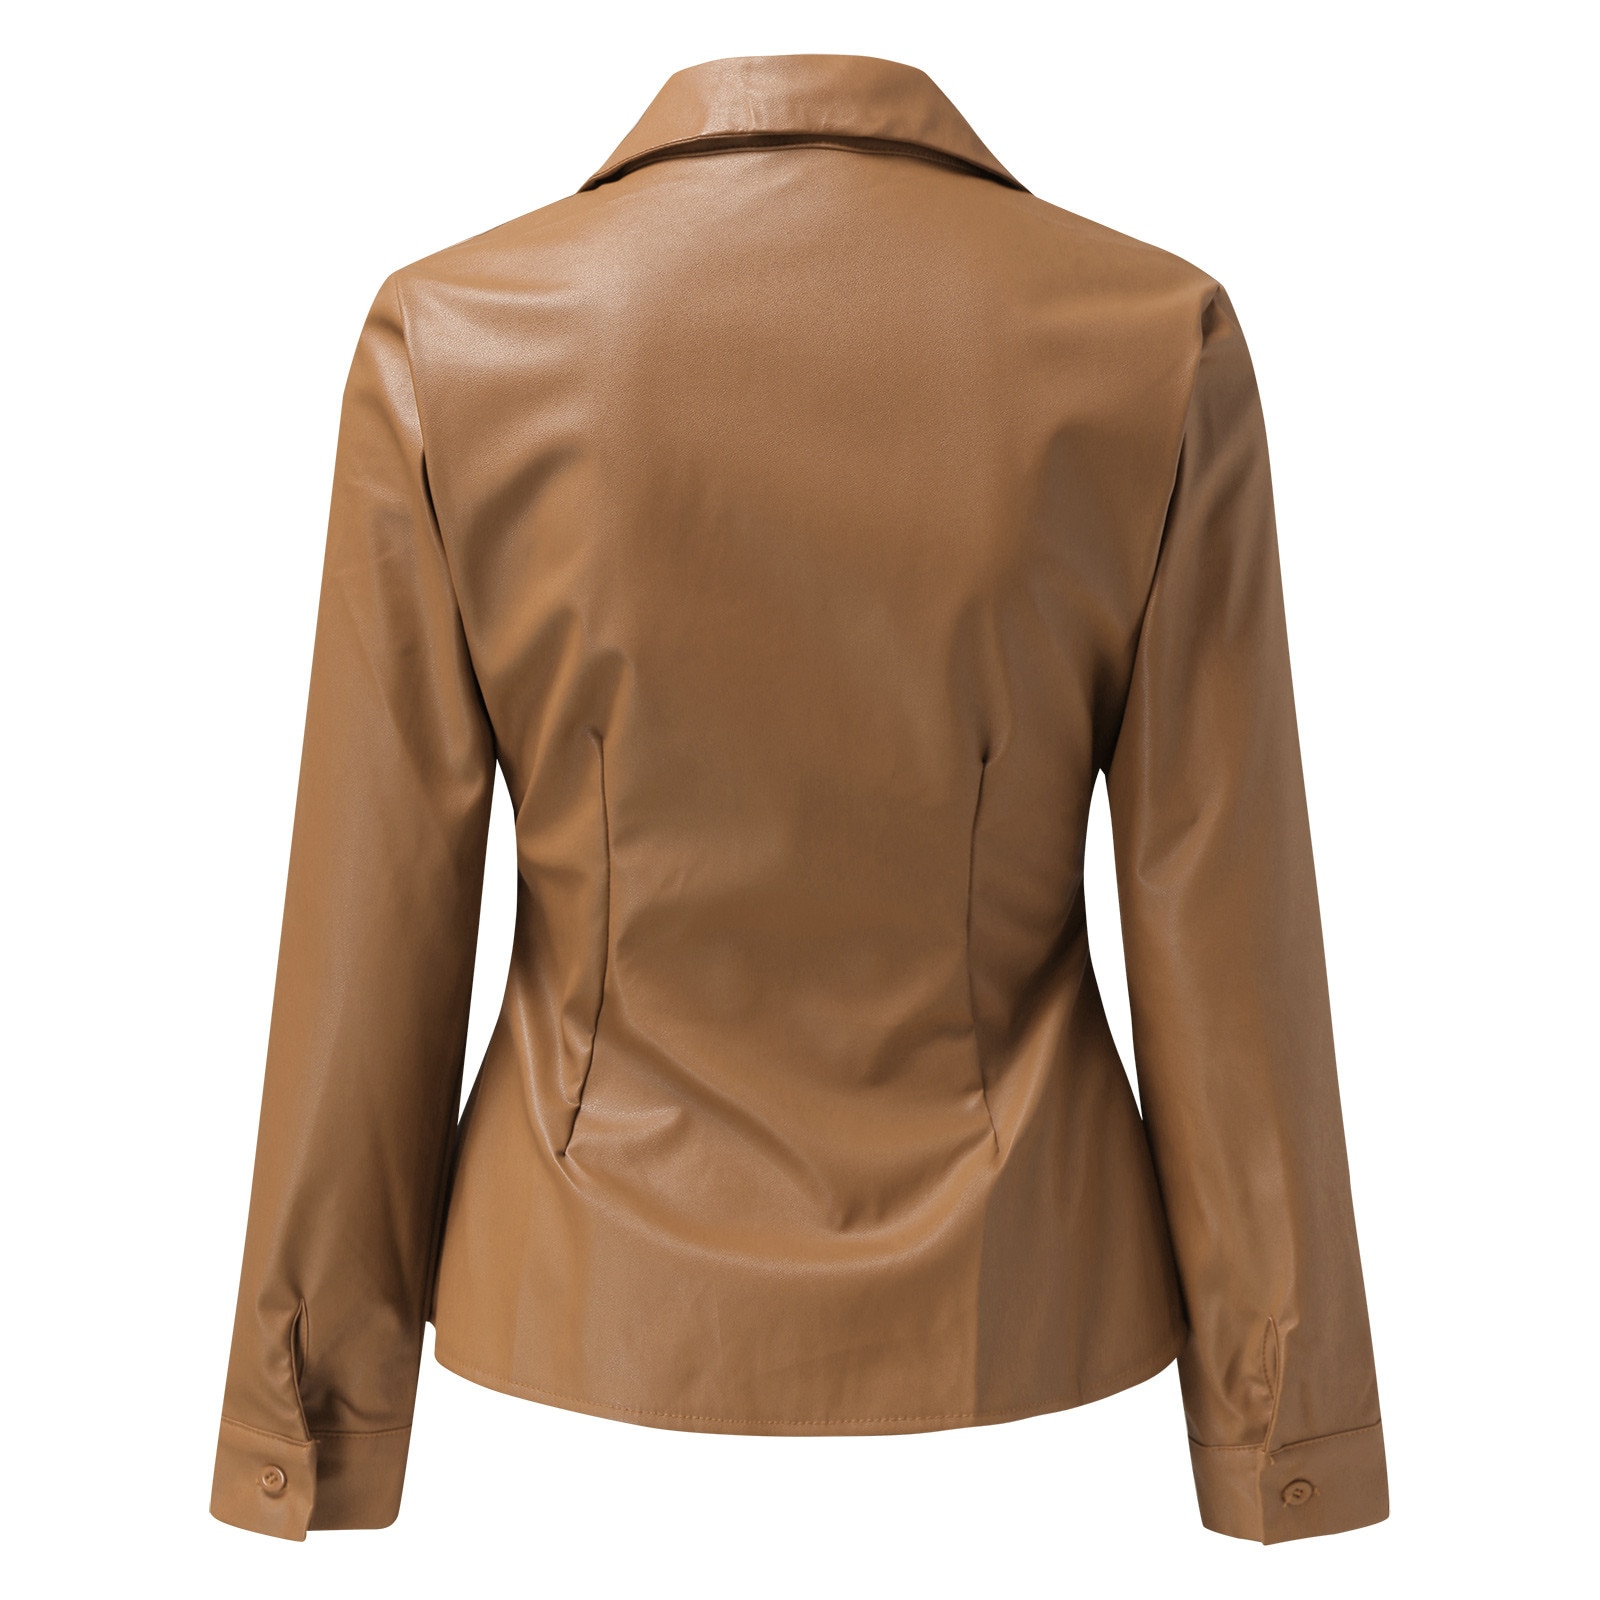 Fashion Leather Solid Blouse Shirt Casual Buttons Lapel Tops Casual Summer Ladies Female Women Long Sleeve Blusas